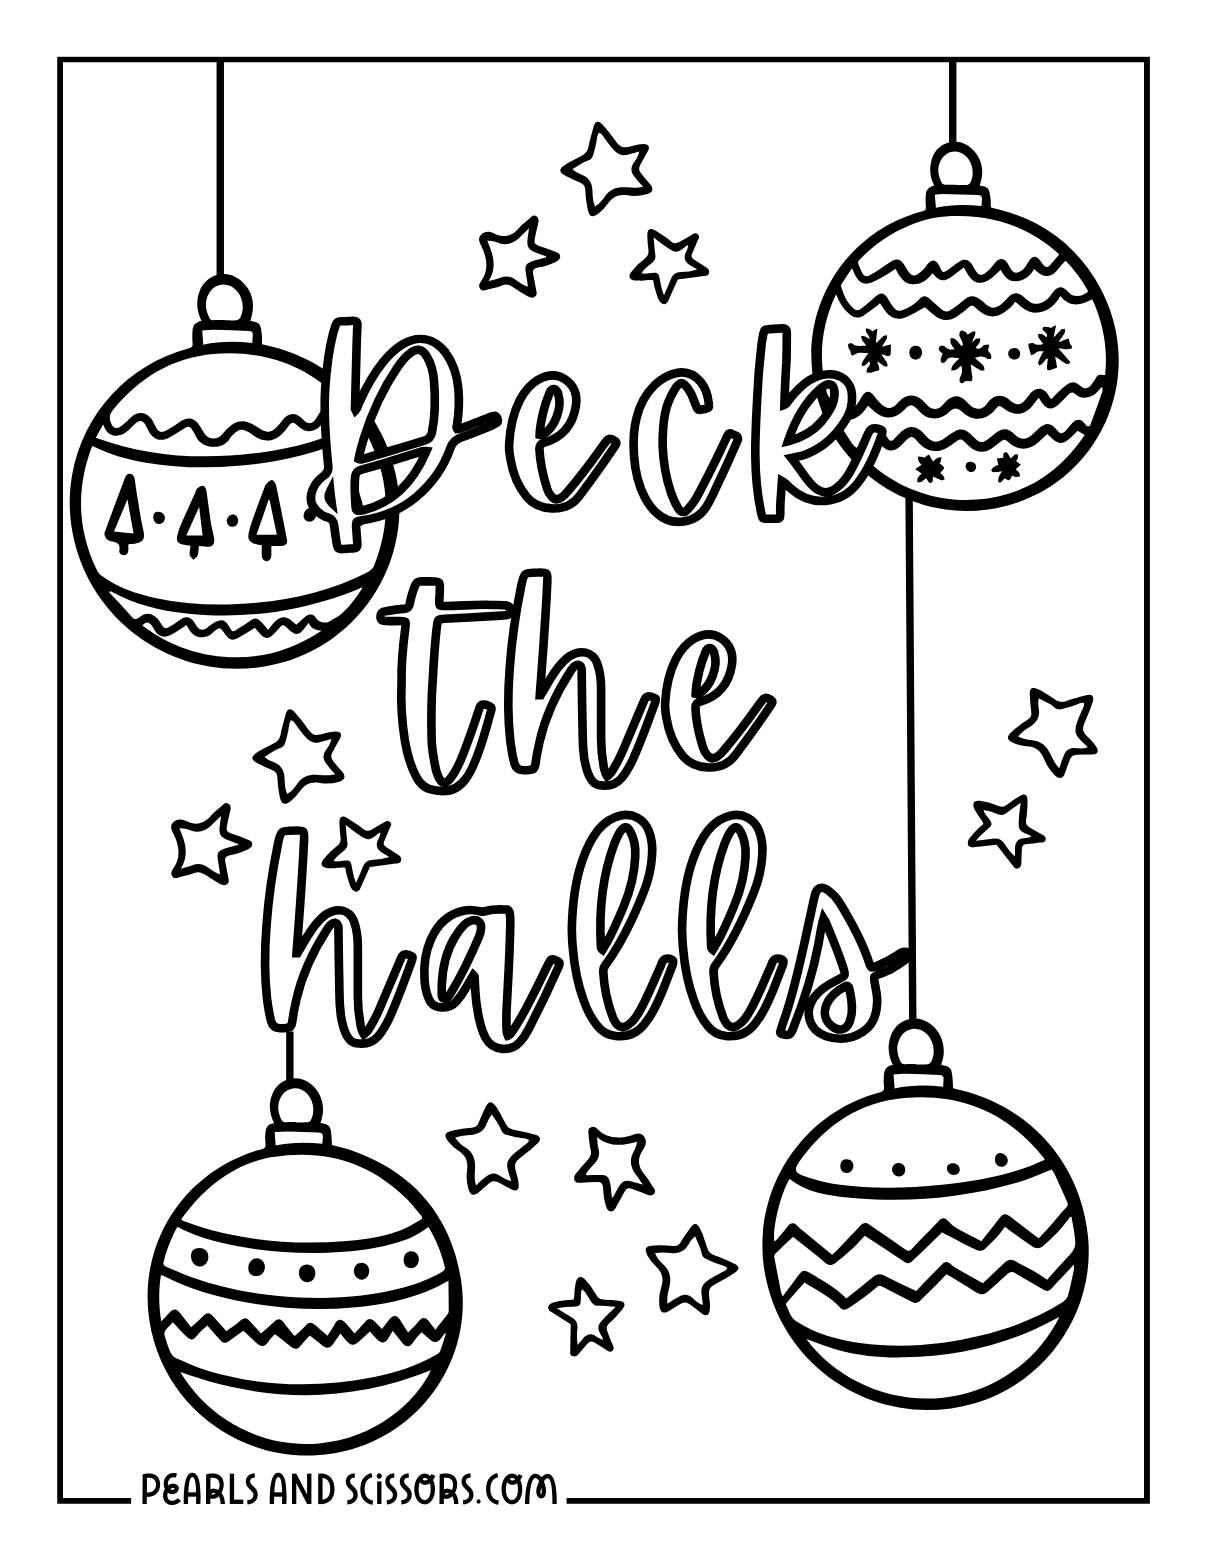 Christmas ornaments coloring page for adults.